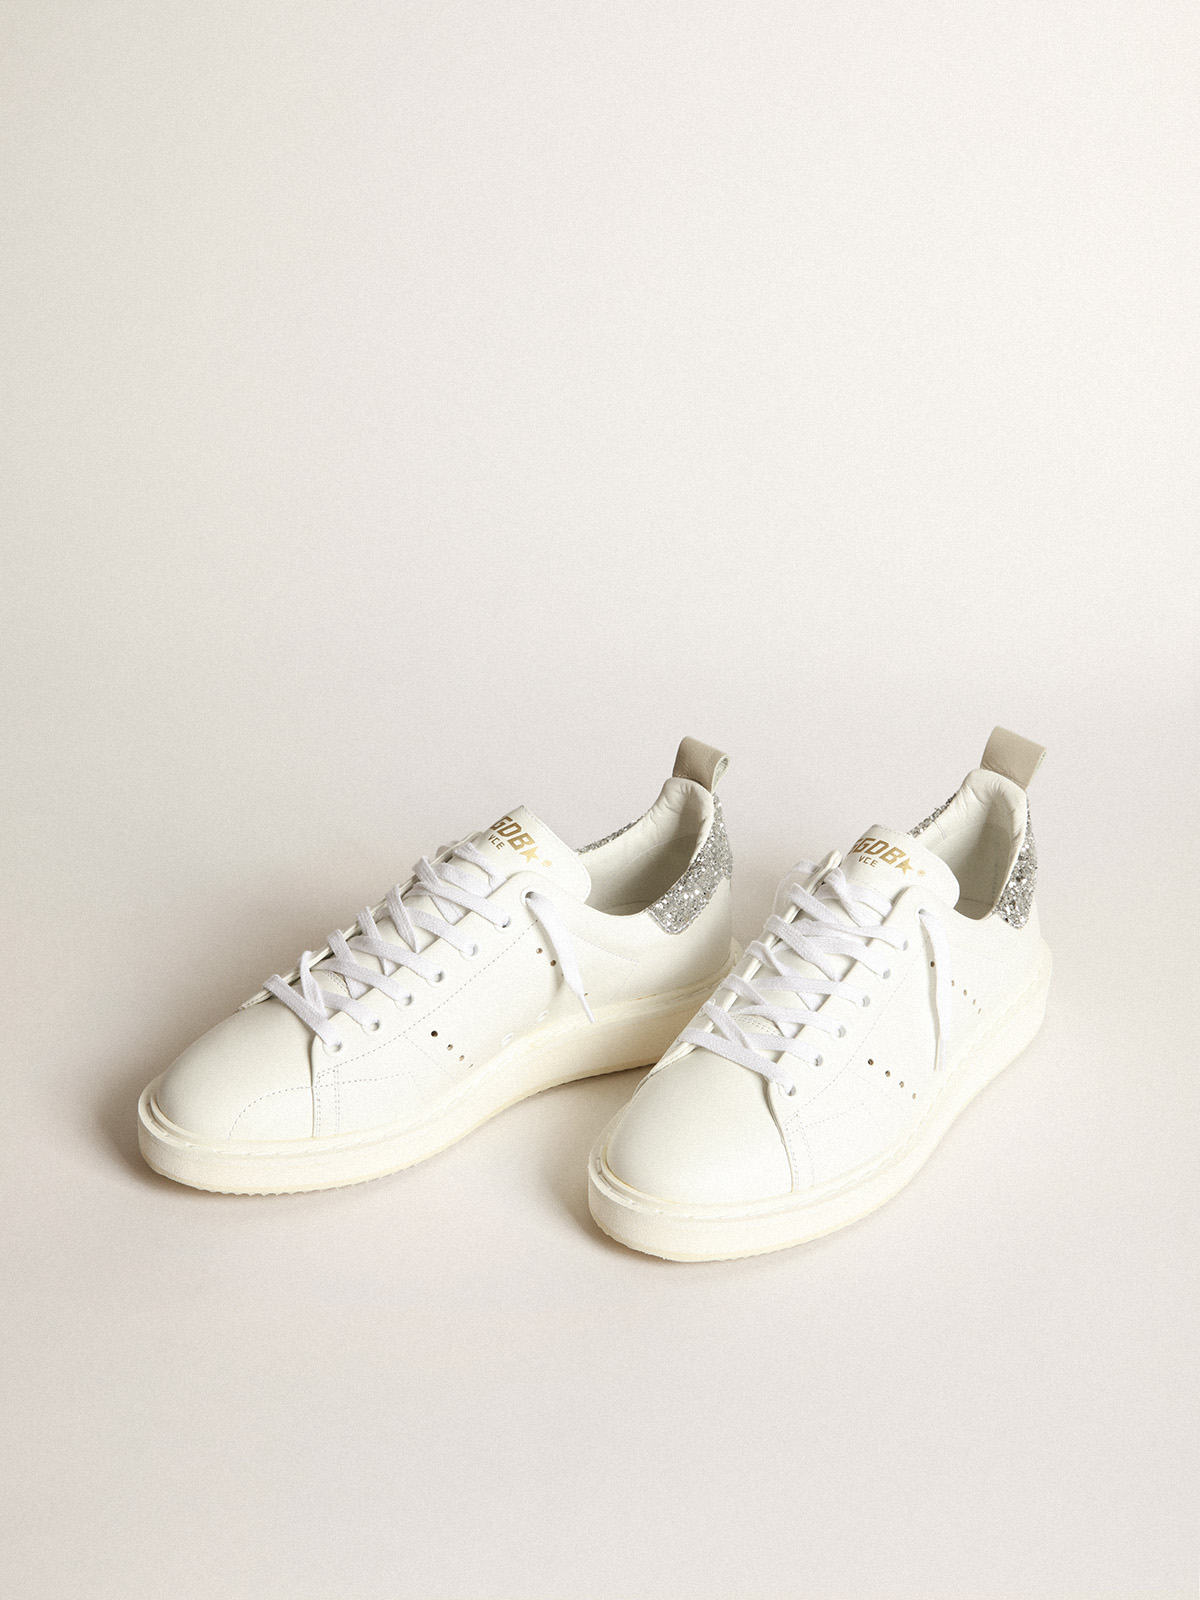 Starter sneakers in white leather with silver glitter heel tab | Golden  Goose